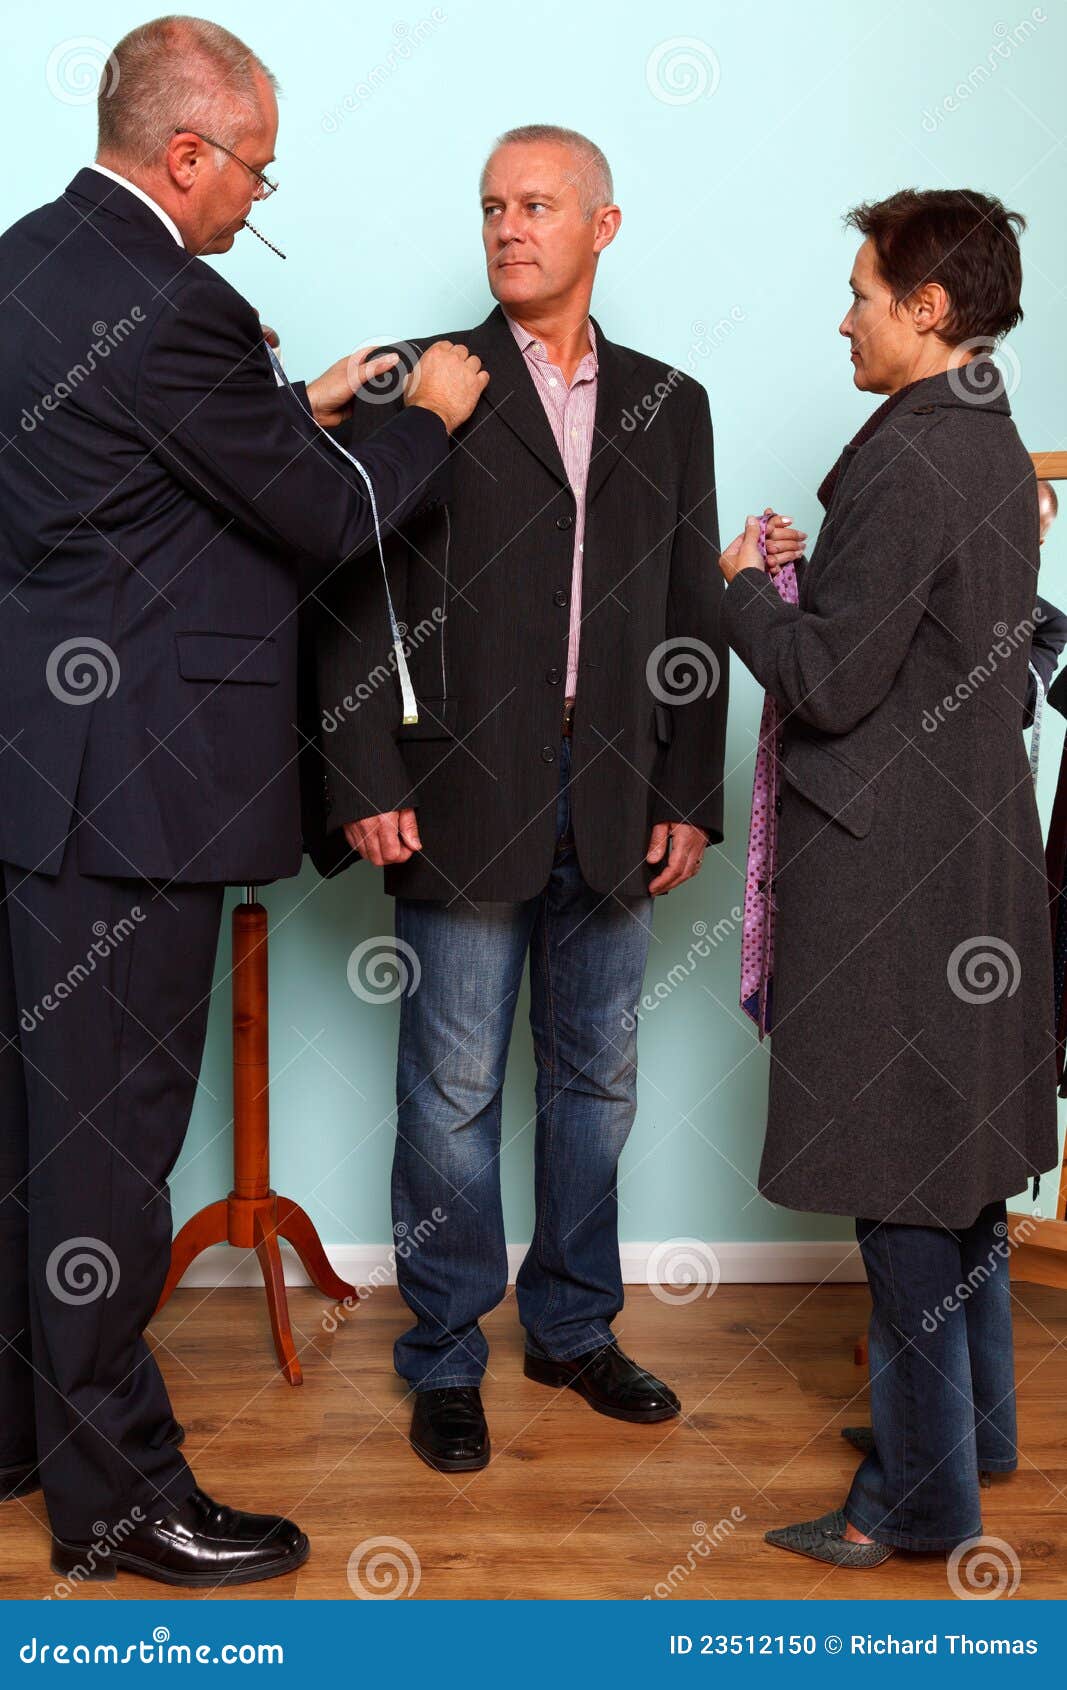 man having a bespoke suit fitted.